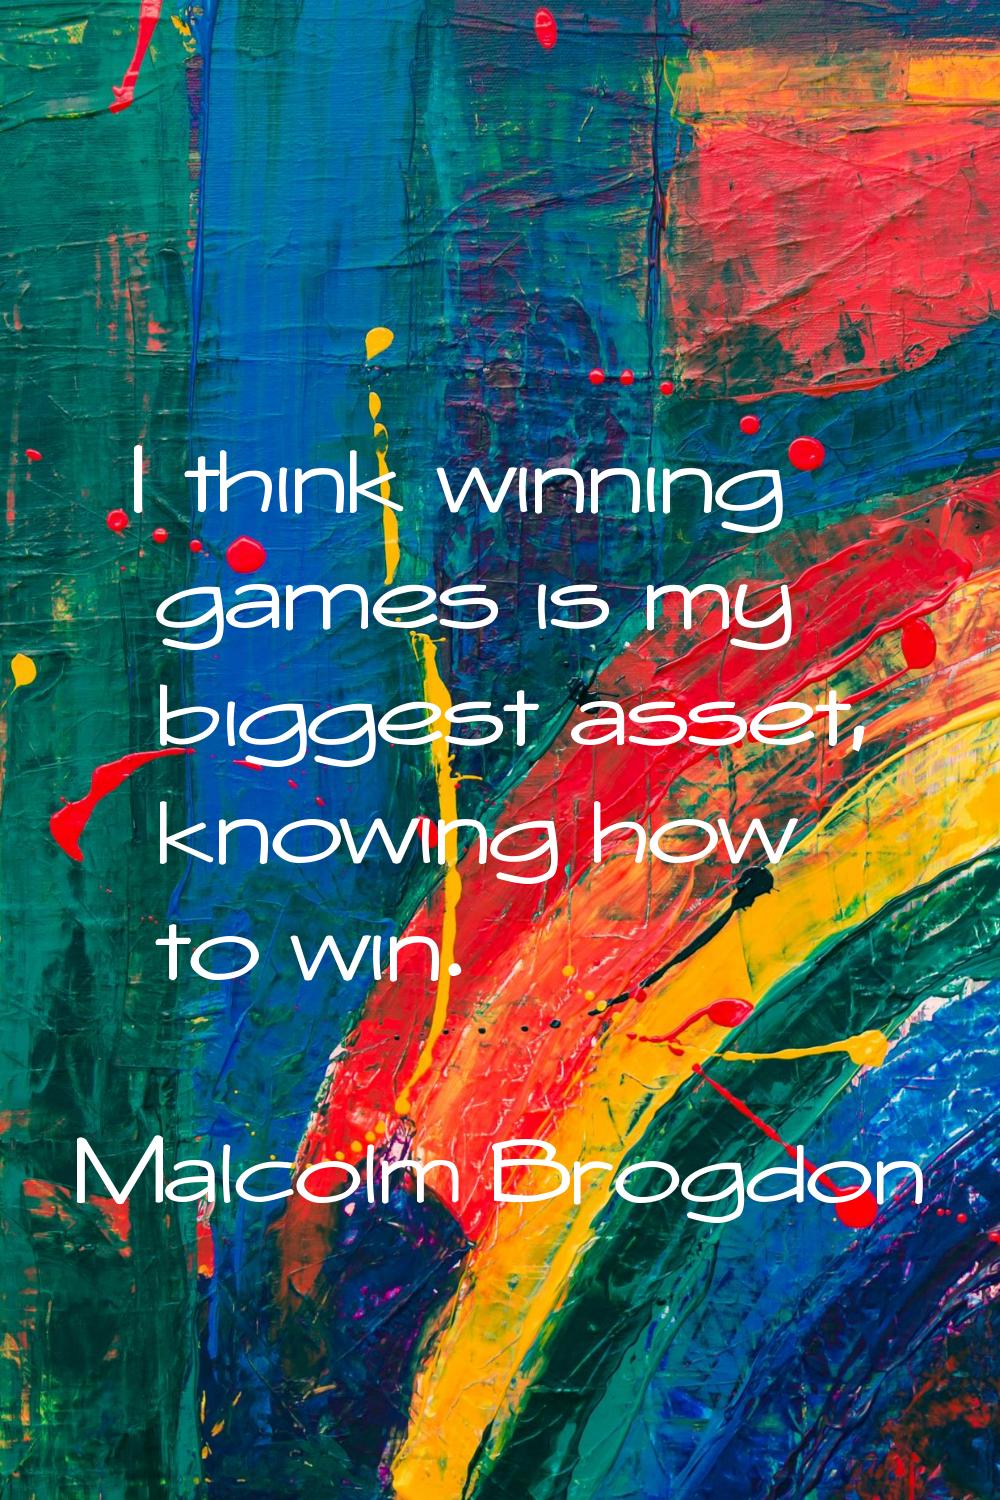 I think winning games is my biggest asset, knowing how to win.